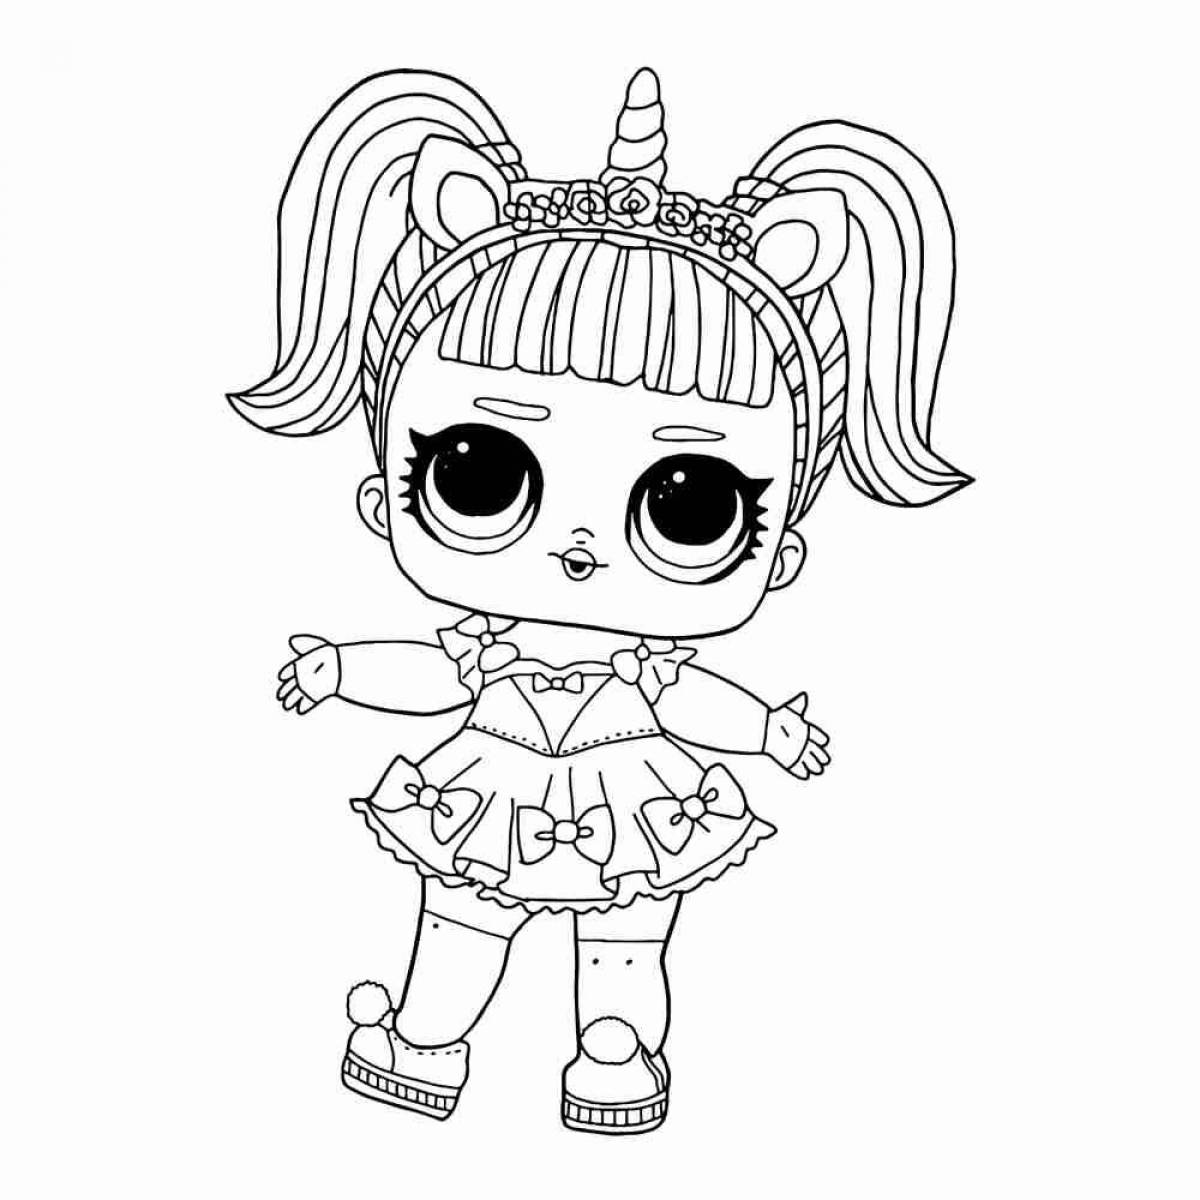 Fun coloring book lol doll for kids